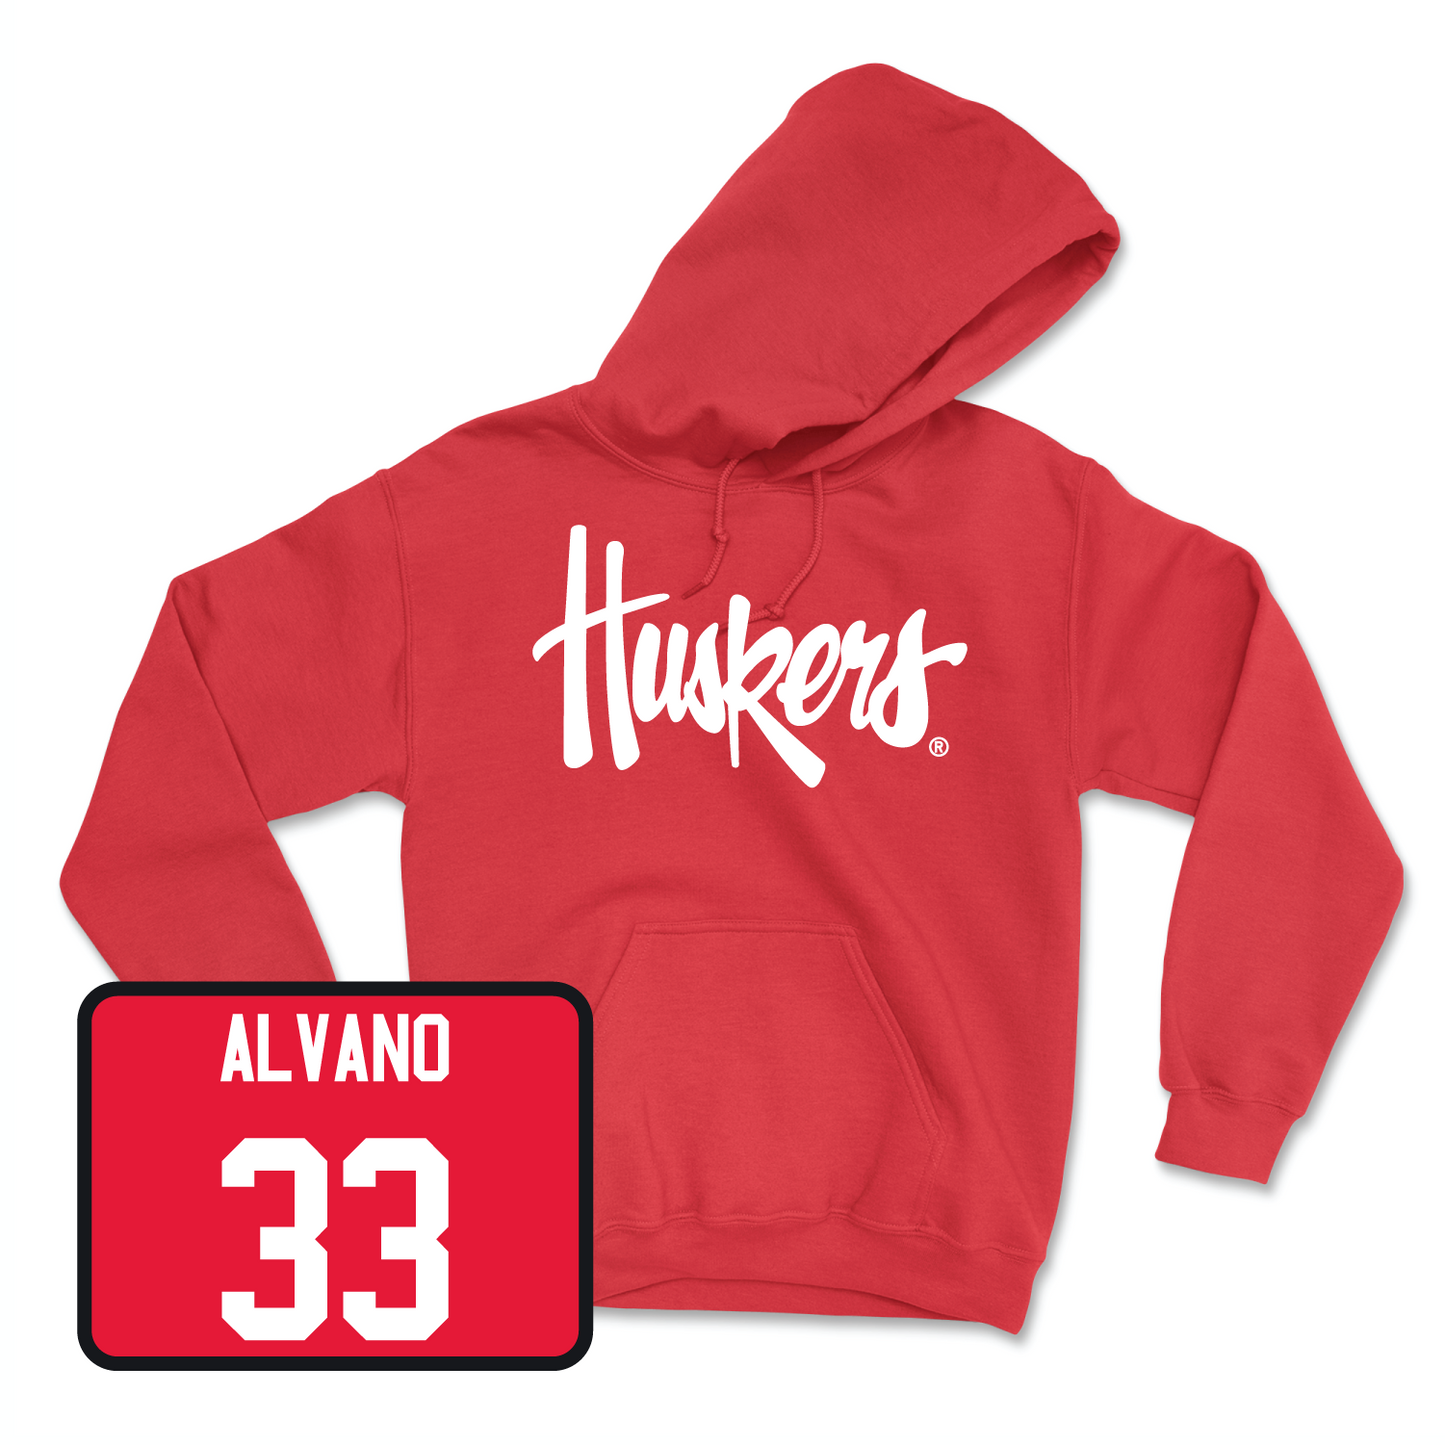 Red Football Huskers Hoodie 10 4X-Large / Tristan Alvano | #33